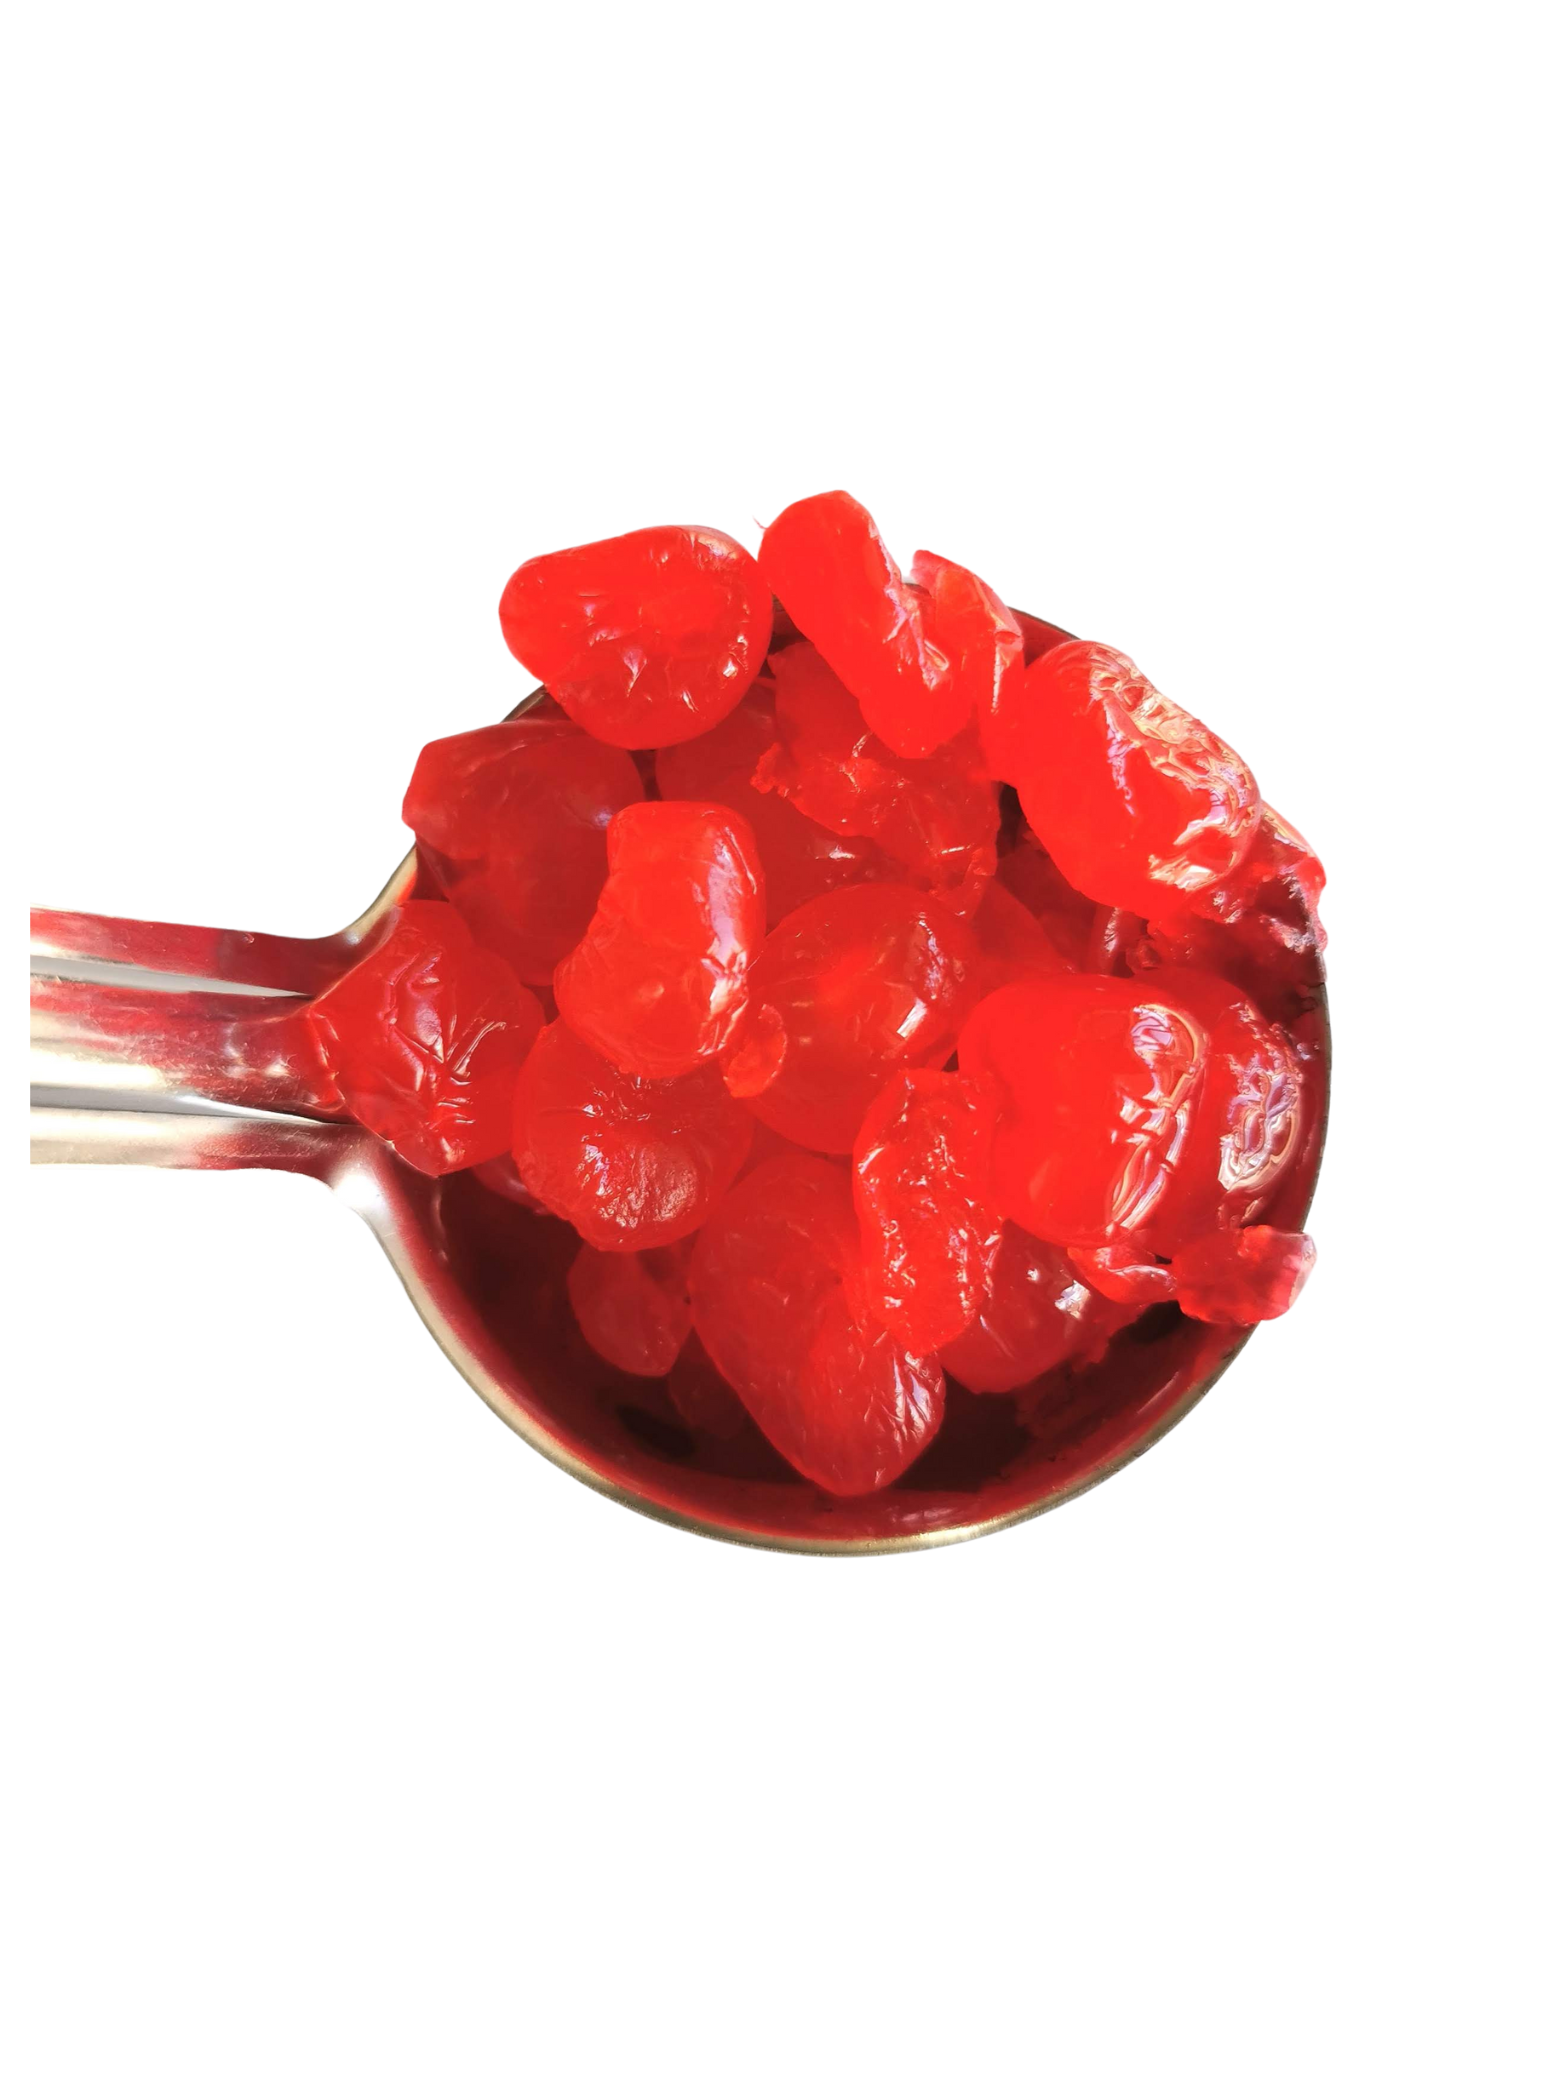 Glace Red Cherries